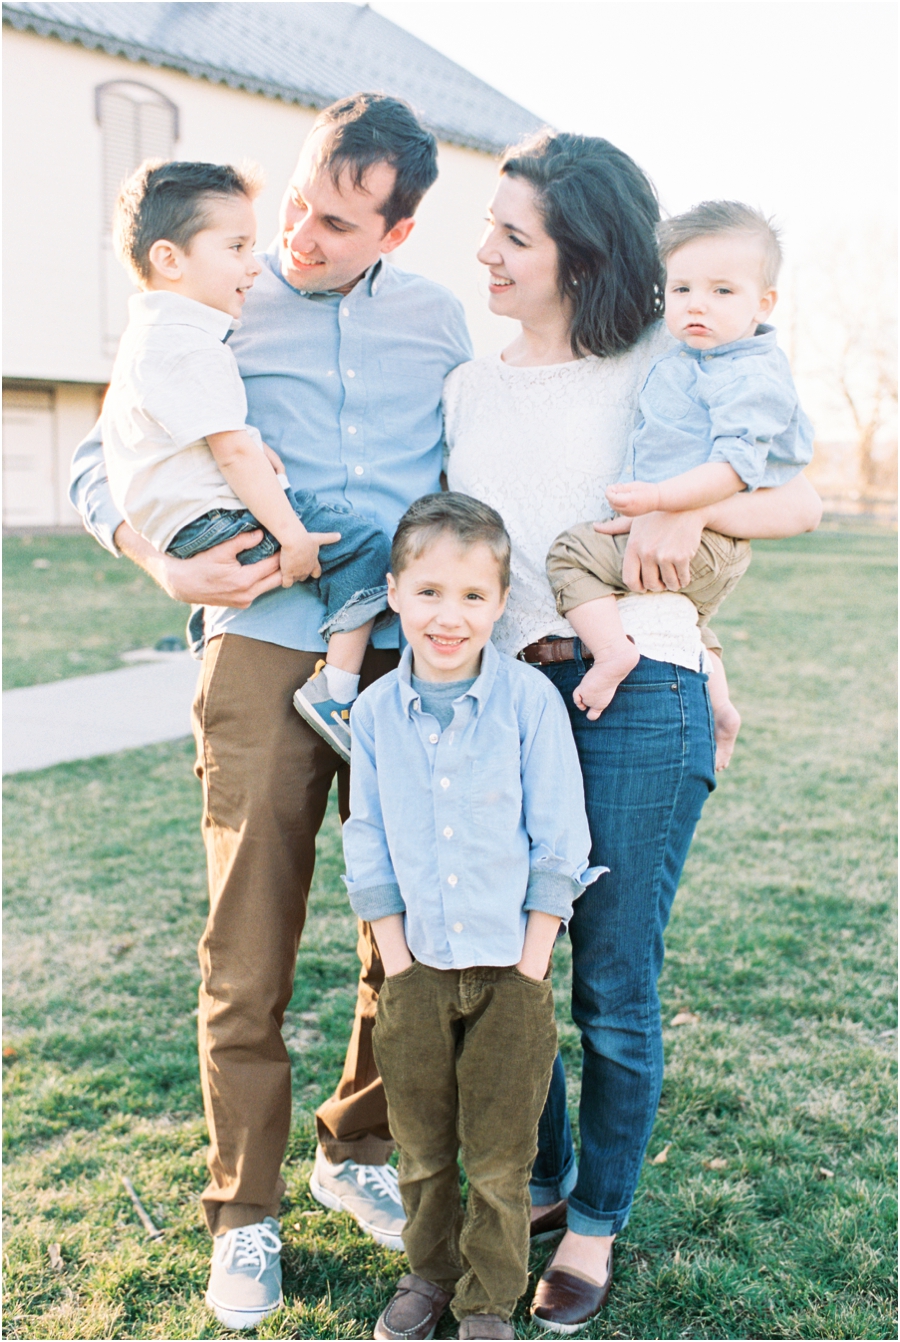 Heartfelt Family Photography at the Fort Hunter Mansion by Hillary Muelleck Photography || hillarymuelleck.com